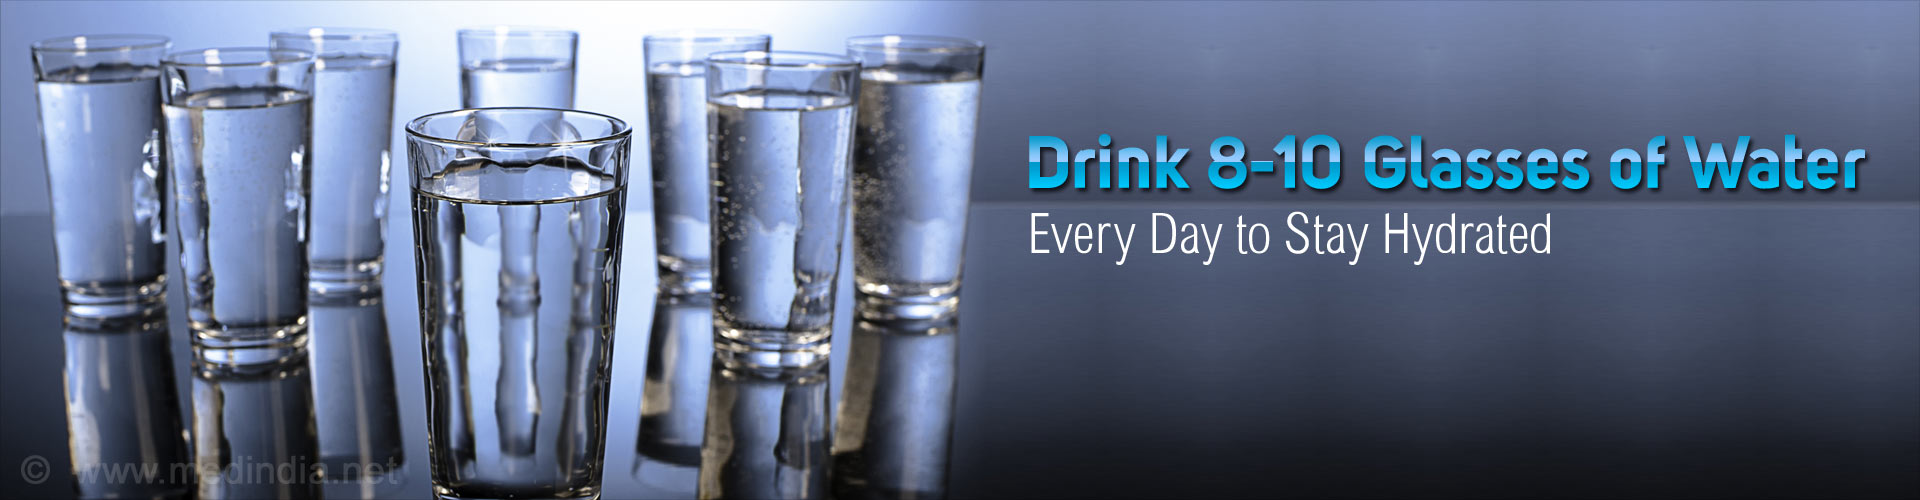 Drink 8-10 Glasses of Water Every Day to Stay Hydrated